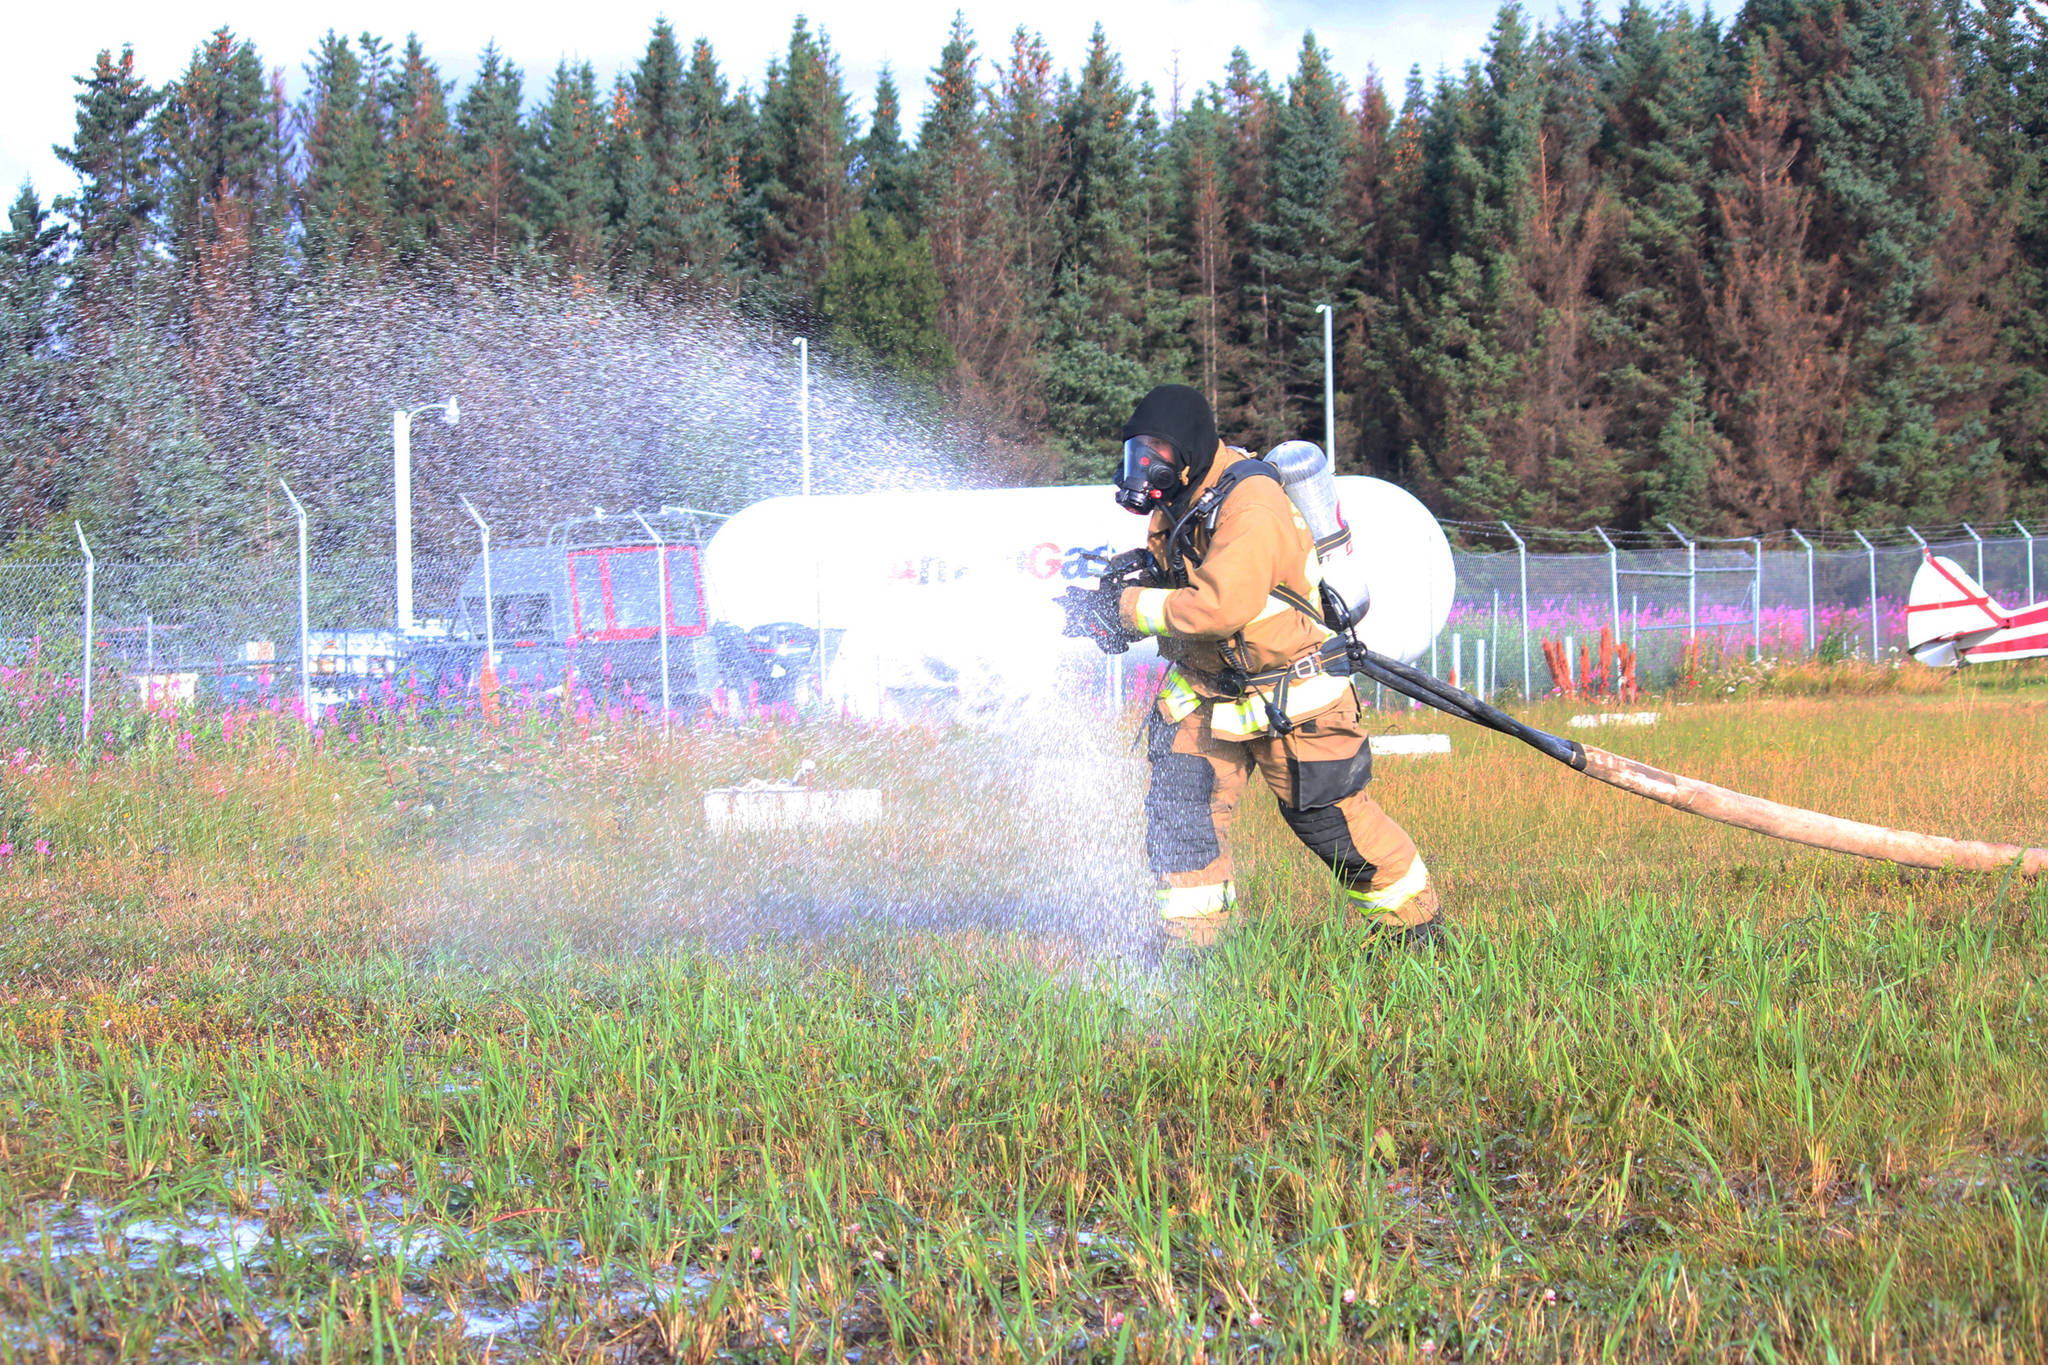 Firefighter Jesse Sherwood sprays foam at a bus being used for a simulated airplane crash Saturday, Aug. 19. 2017 at the Homer Airport in Homer, Alaska. The simulation was part of an emergency drill done at the airport every three years to test the ability of emergency response agencies and airport personnel to handle various scenarios there. (Photo by Megan Pacer/Homer News)